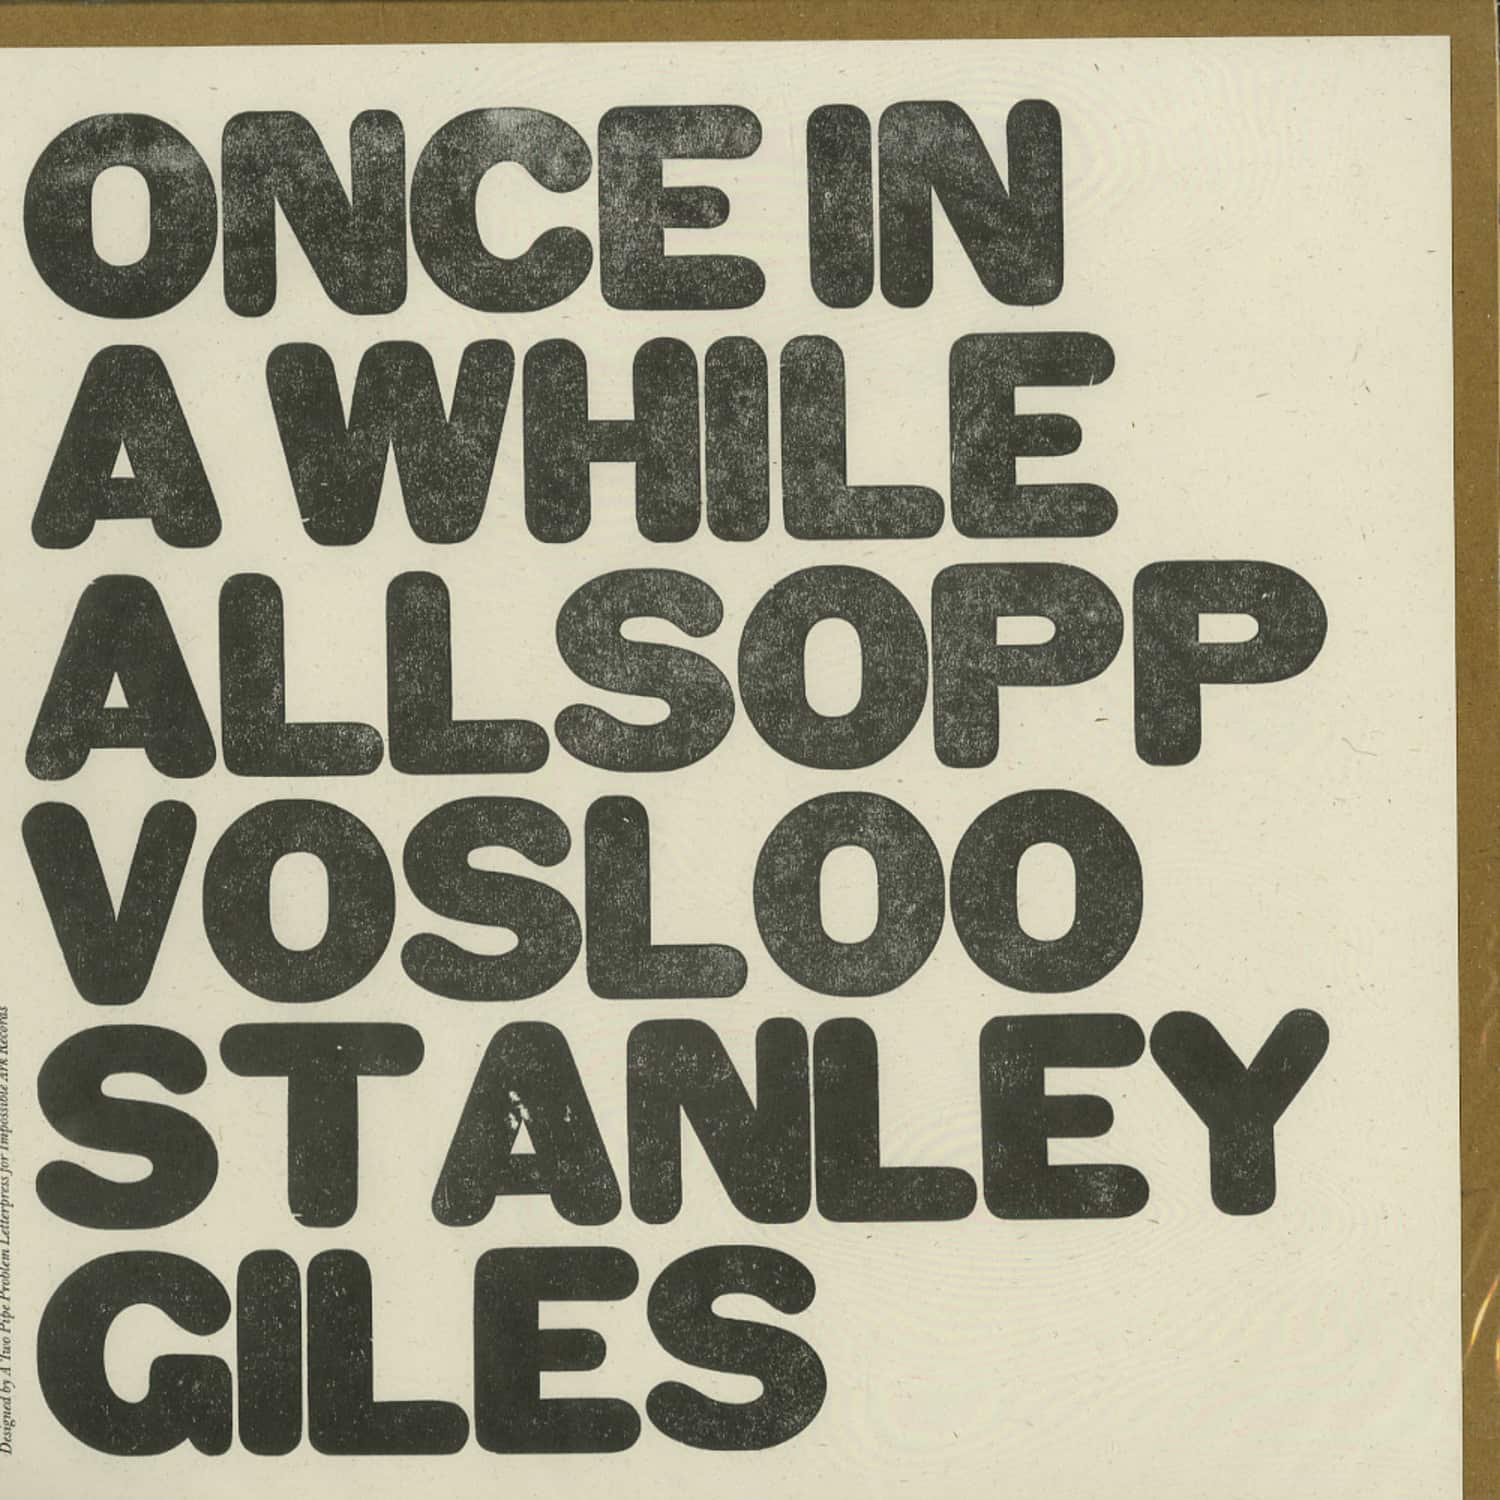 Allsop, Vosloo, Stanley, Giles - ONCE IN A WHILE